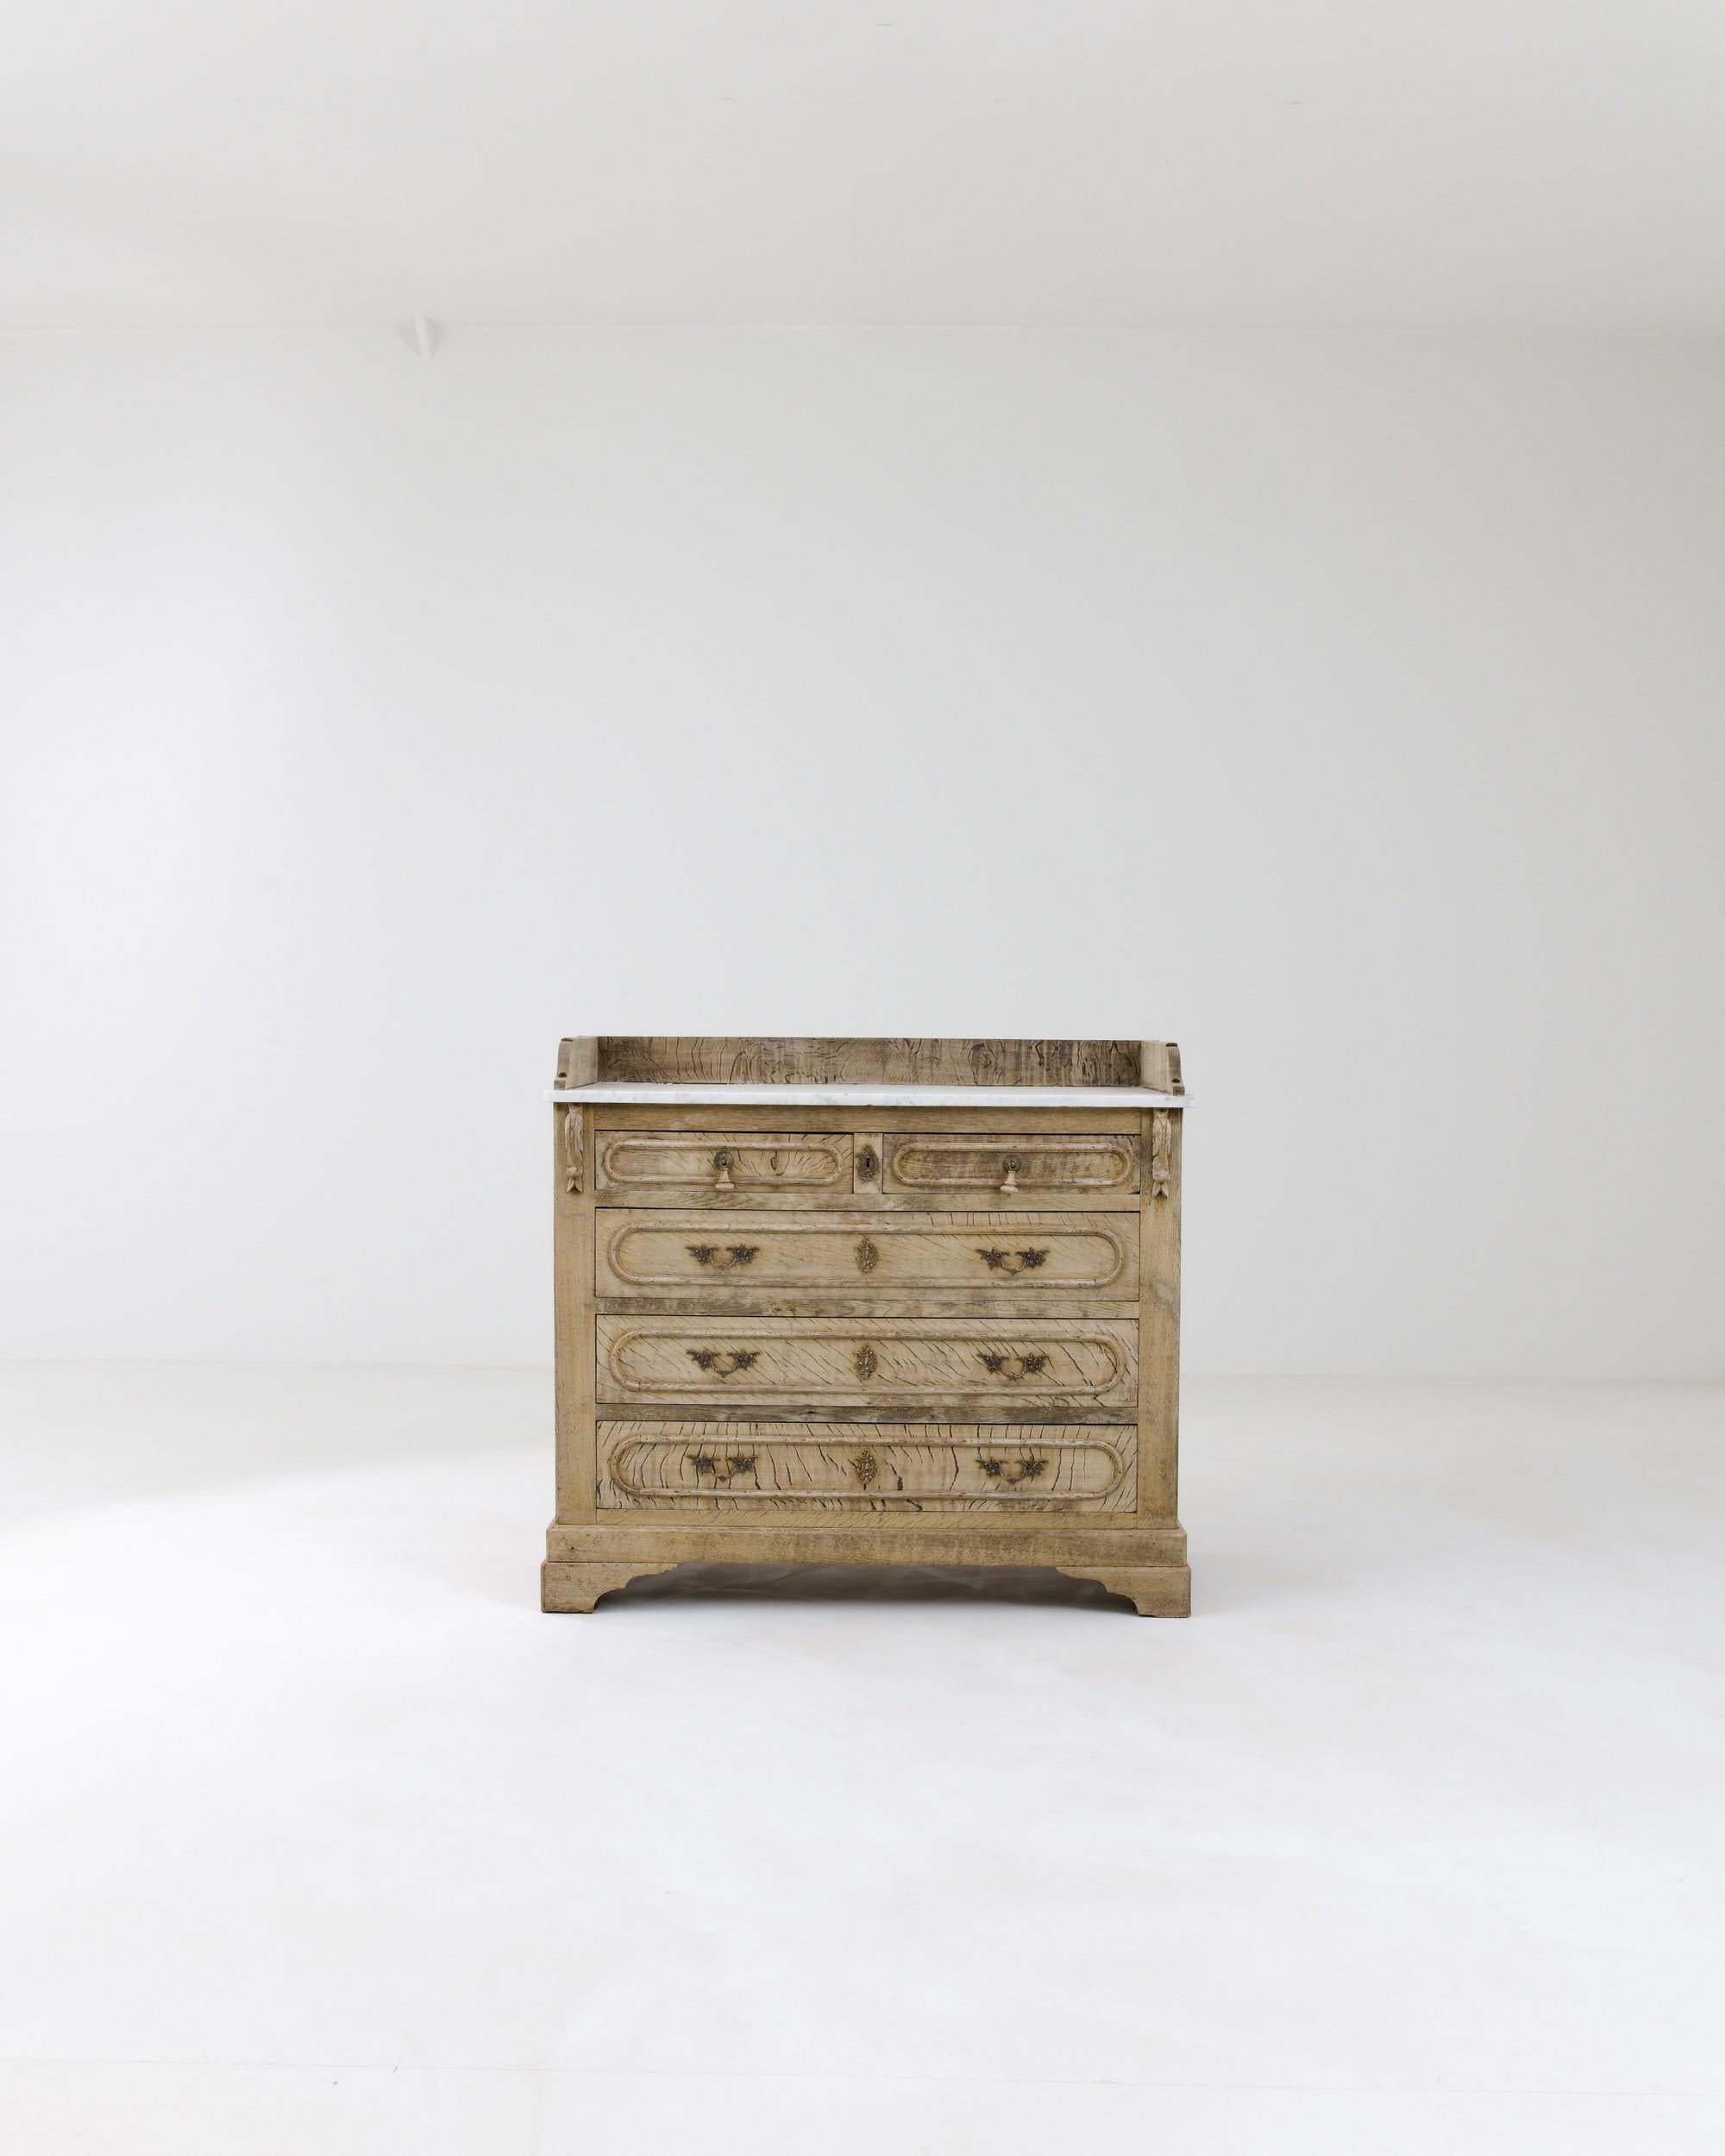 The sturdy bracket ogee feet define the silhouette of this robust antique chest. Its five drawers showcase meticulously crafted brass handles and lock pieces, adorned with foliate motifs that resonate in the carved details on the sides. The white